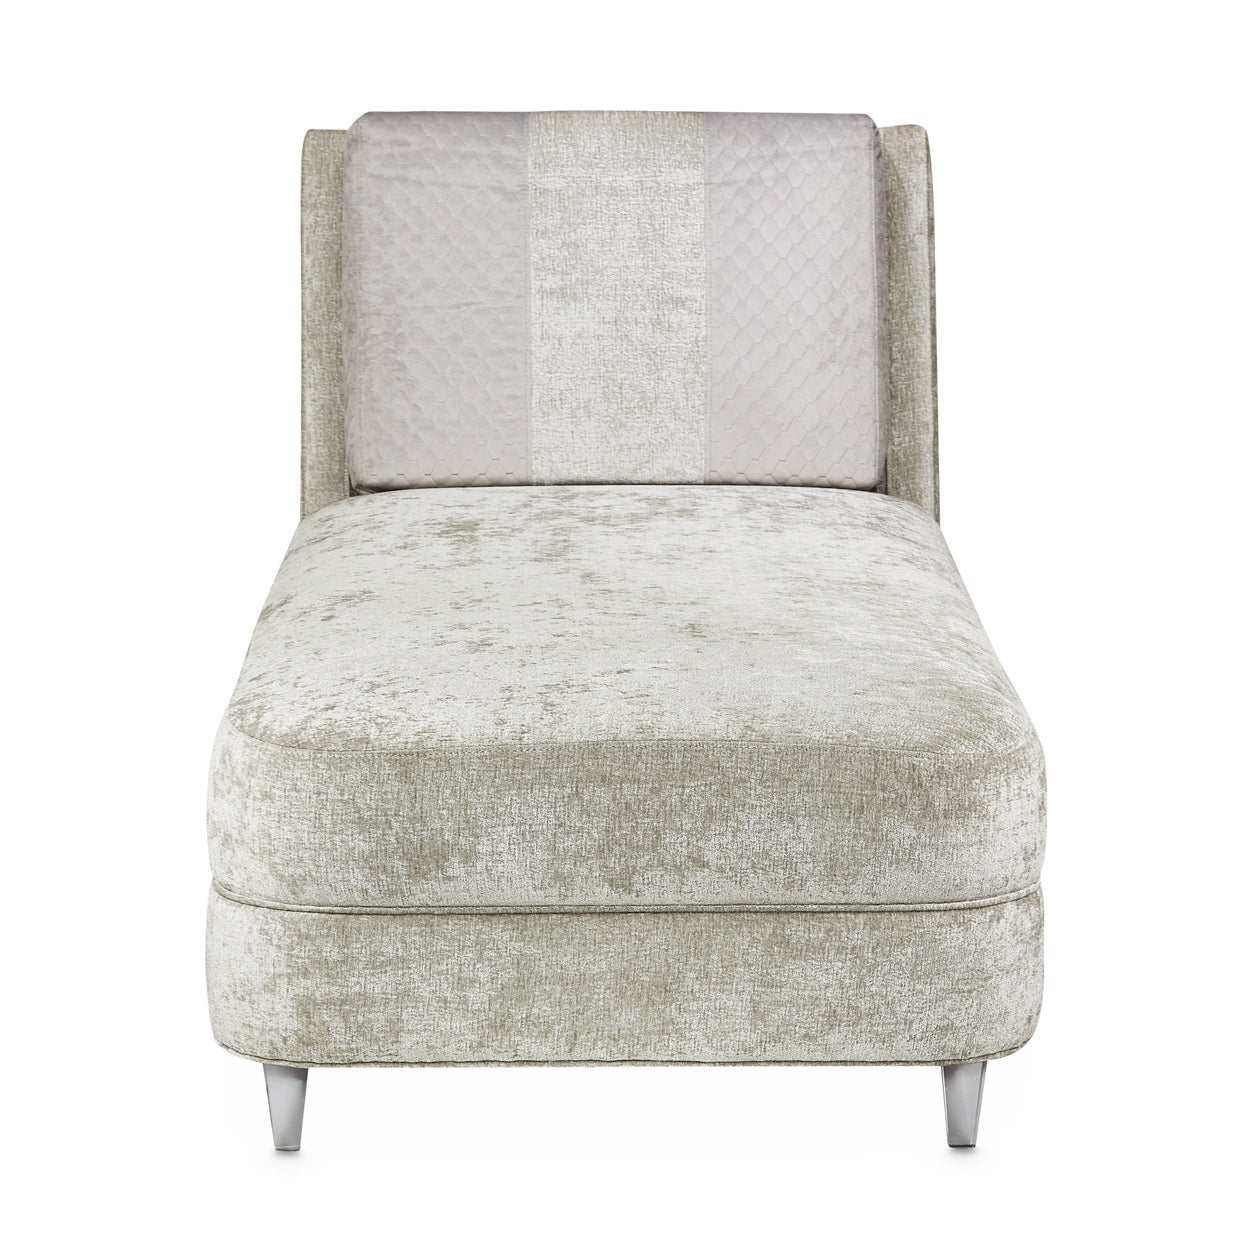 Lanna Chaise, Tailored details, Soft neutrals, Chenille fabric, Luxury cushions, Velvet, honeycomb pattern, Everyday lounging, Home style, dream art, Michael amini 